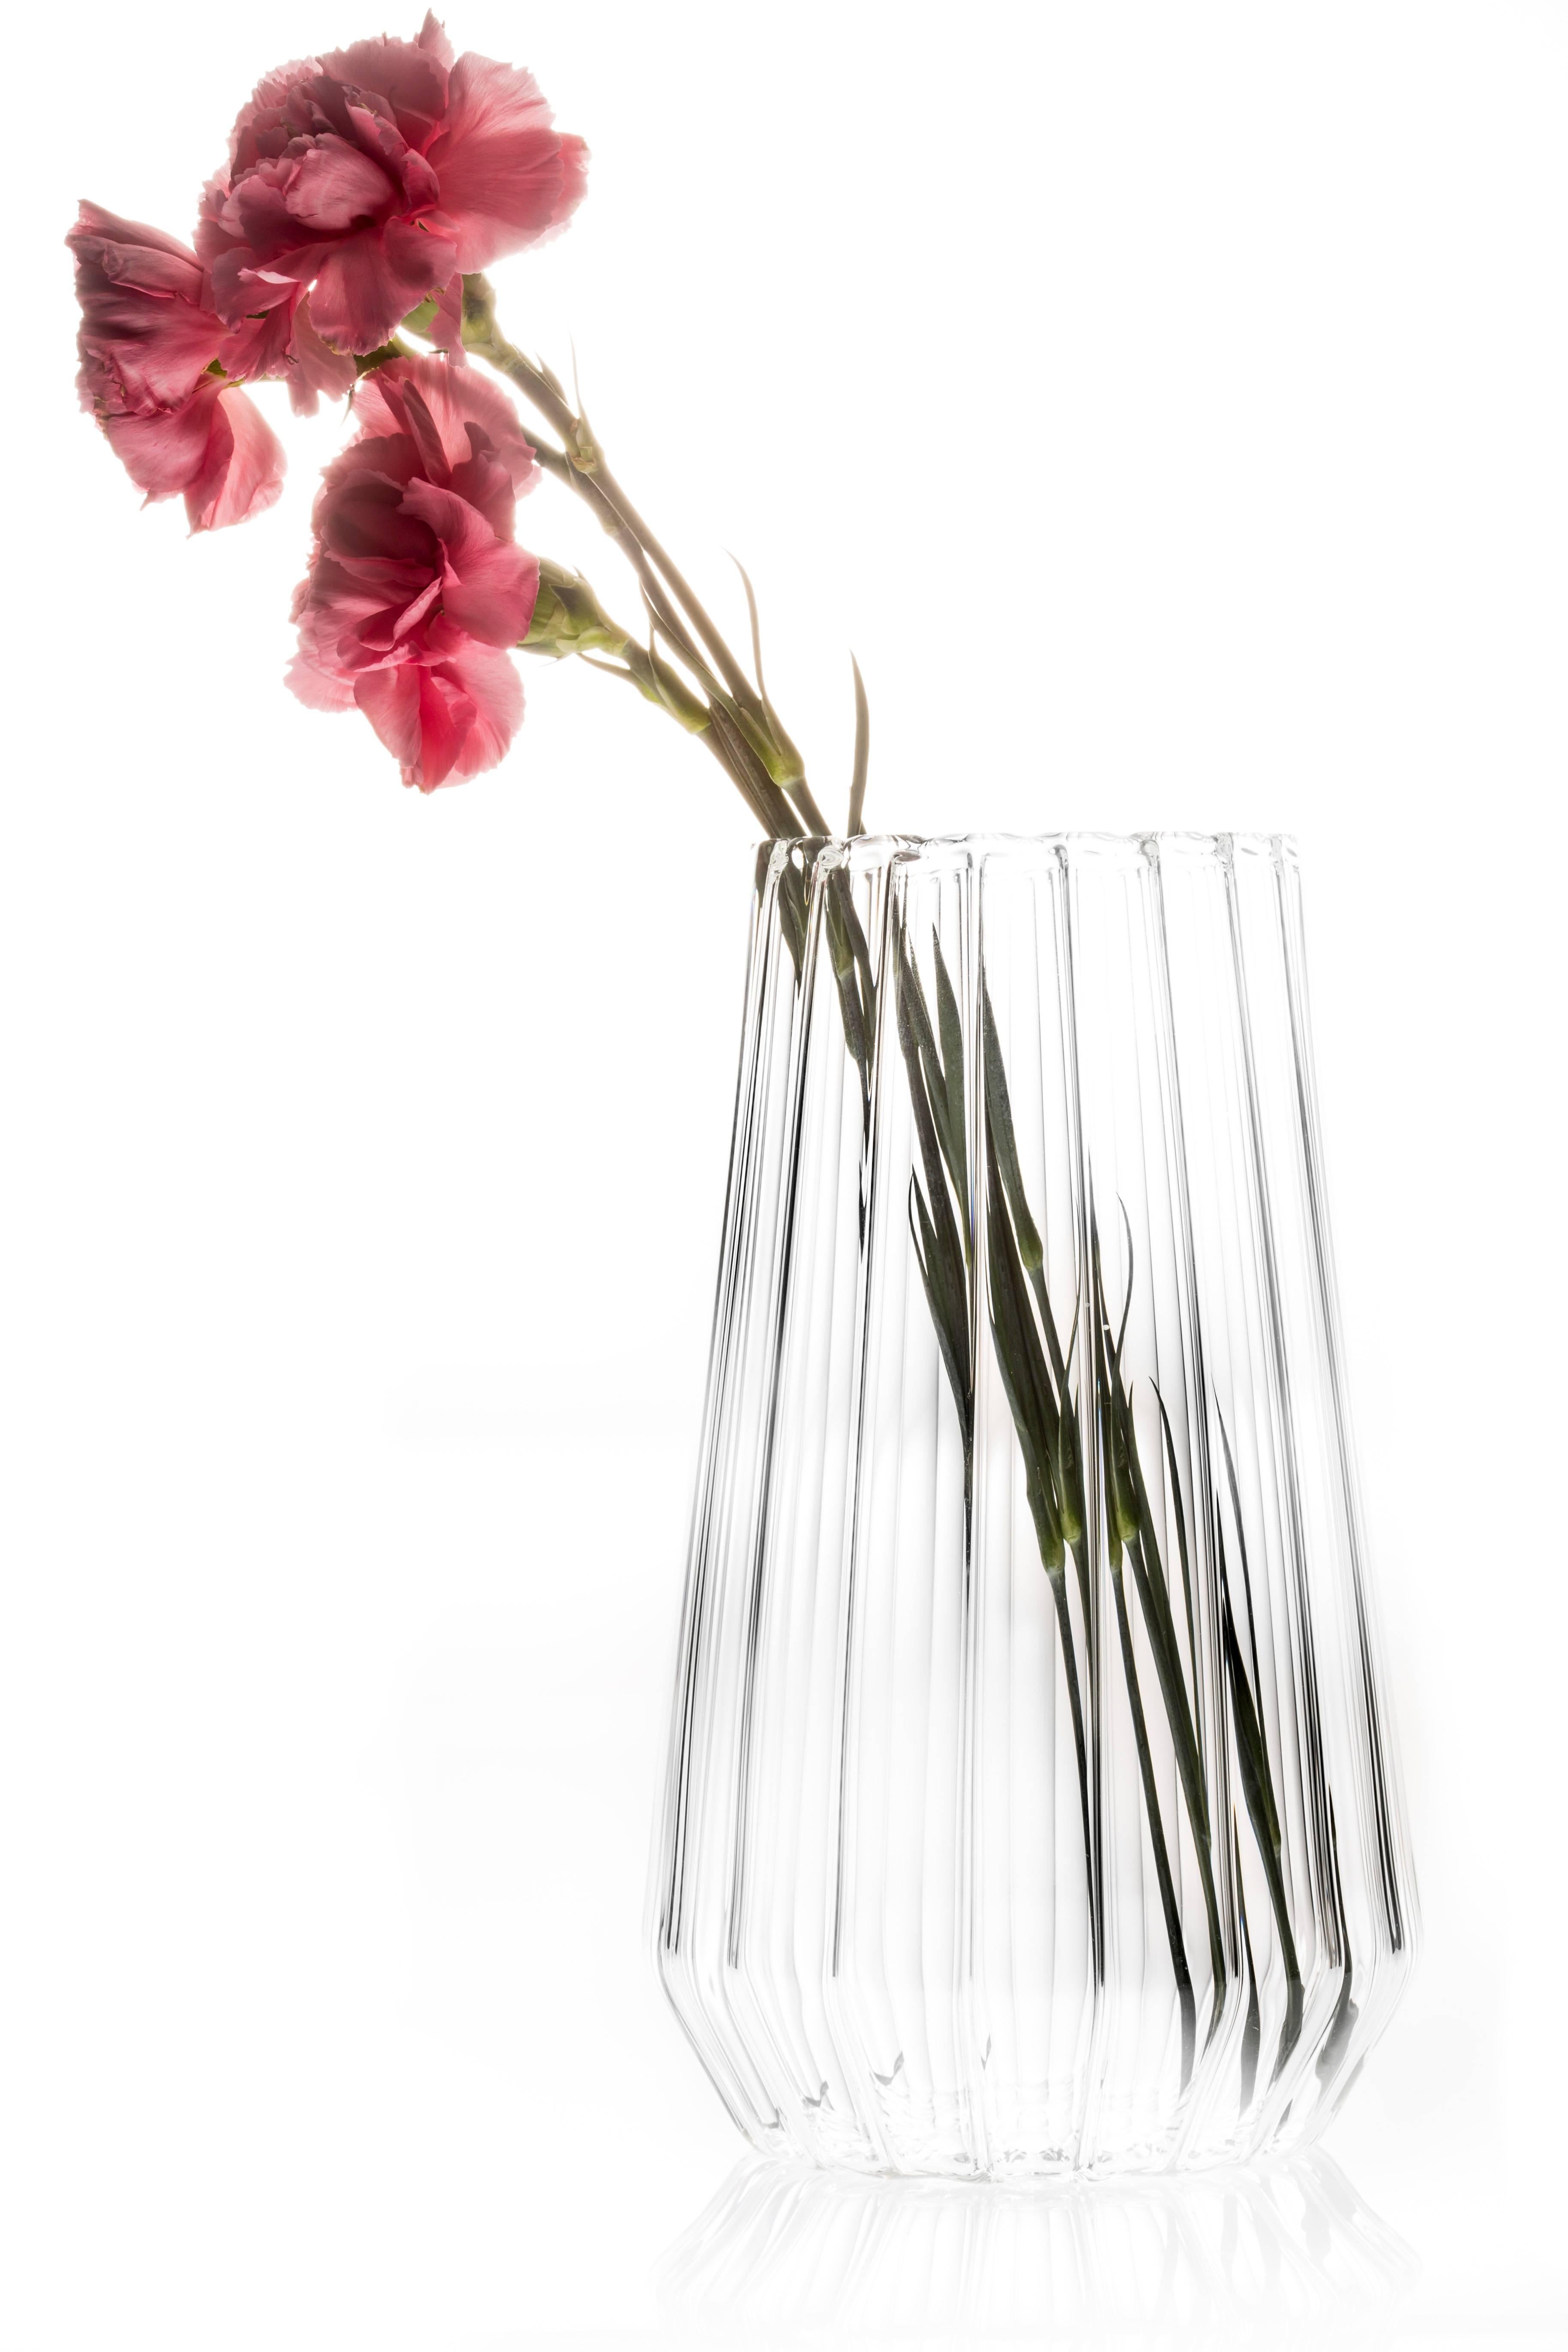 The contemporary Czech glass Stella large vase, from a single stem to a beautiful bouquet, the Stella vases highlight any flower arrangement they contain. For everyday use or formal settings, these vases display flowers gracefully, bringing out